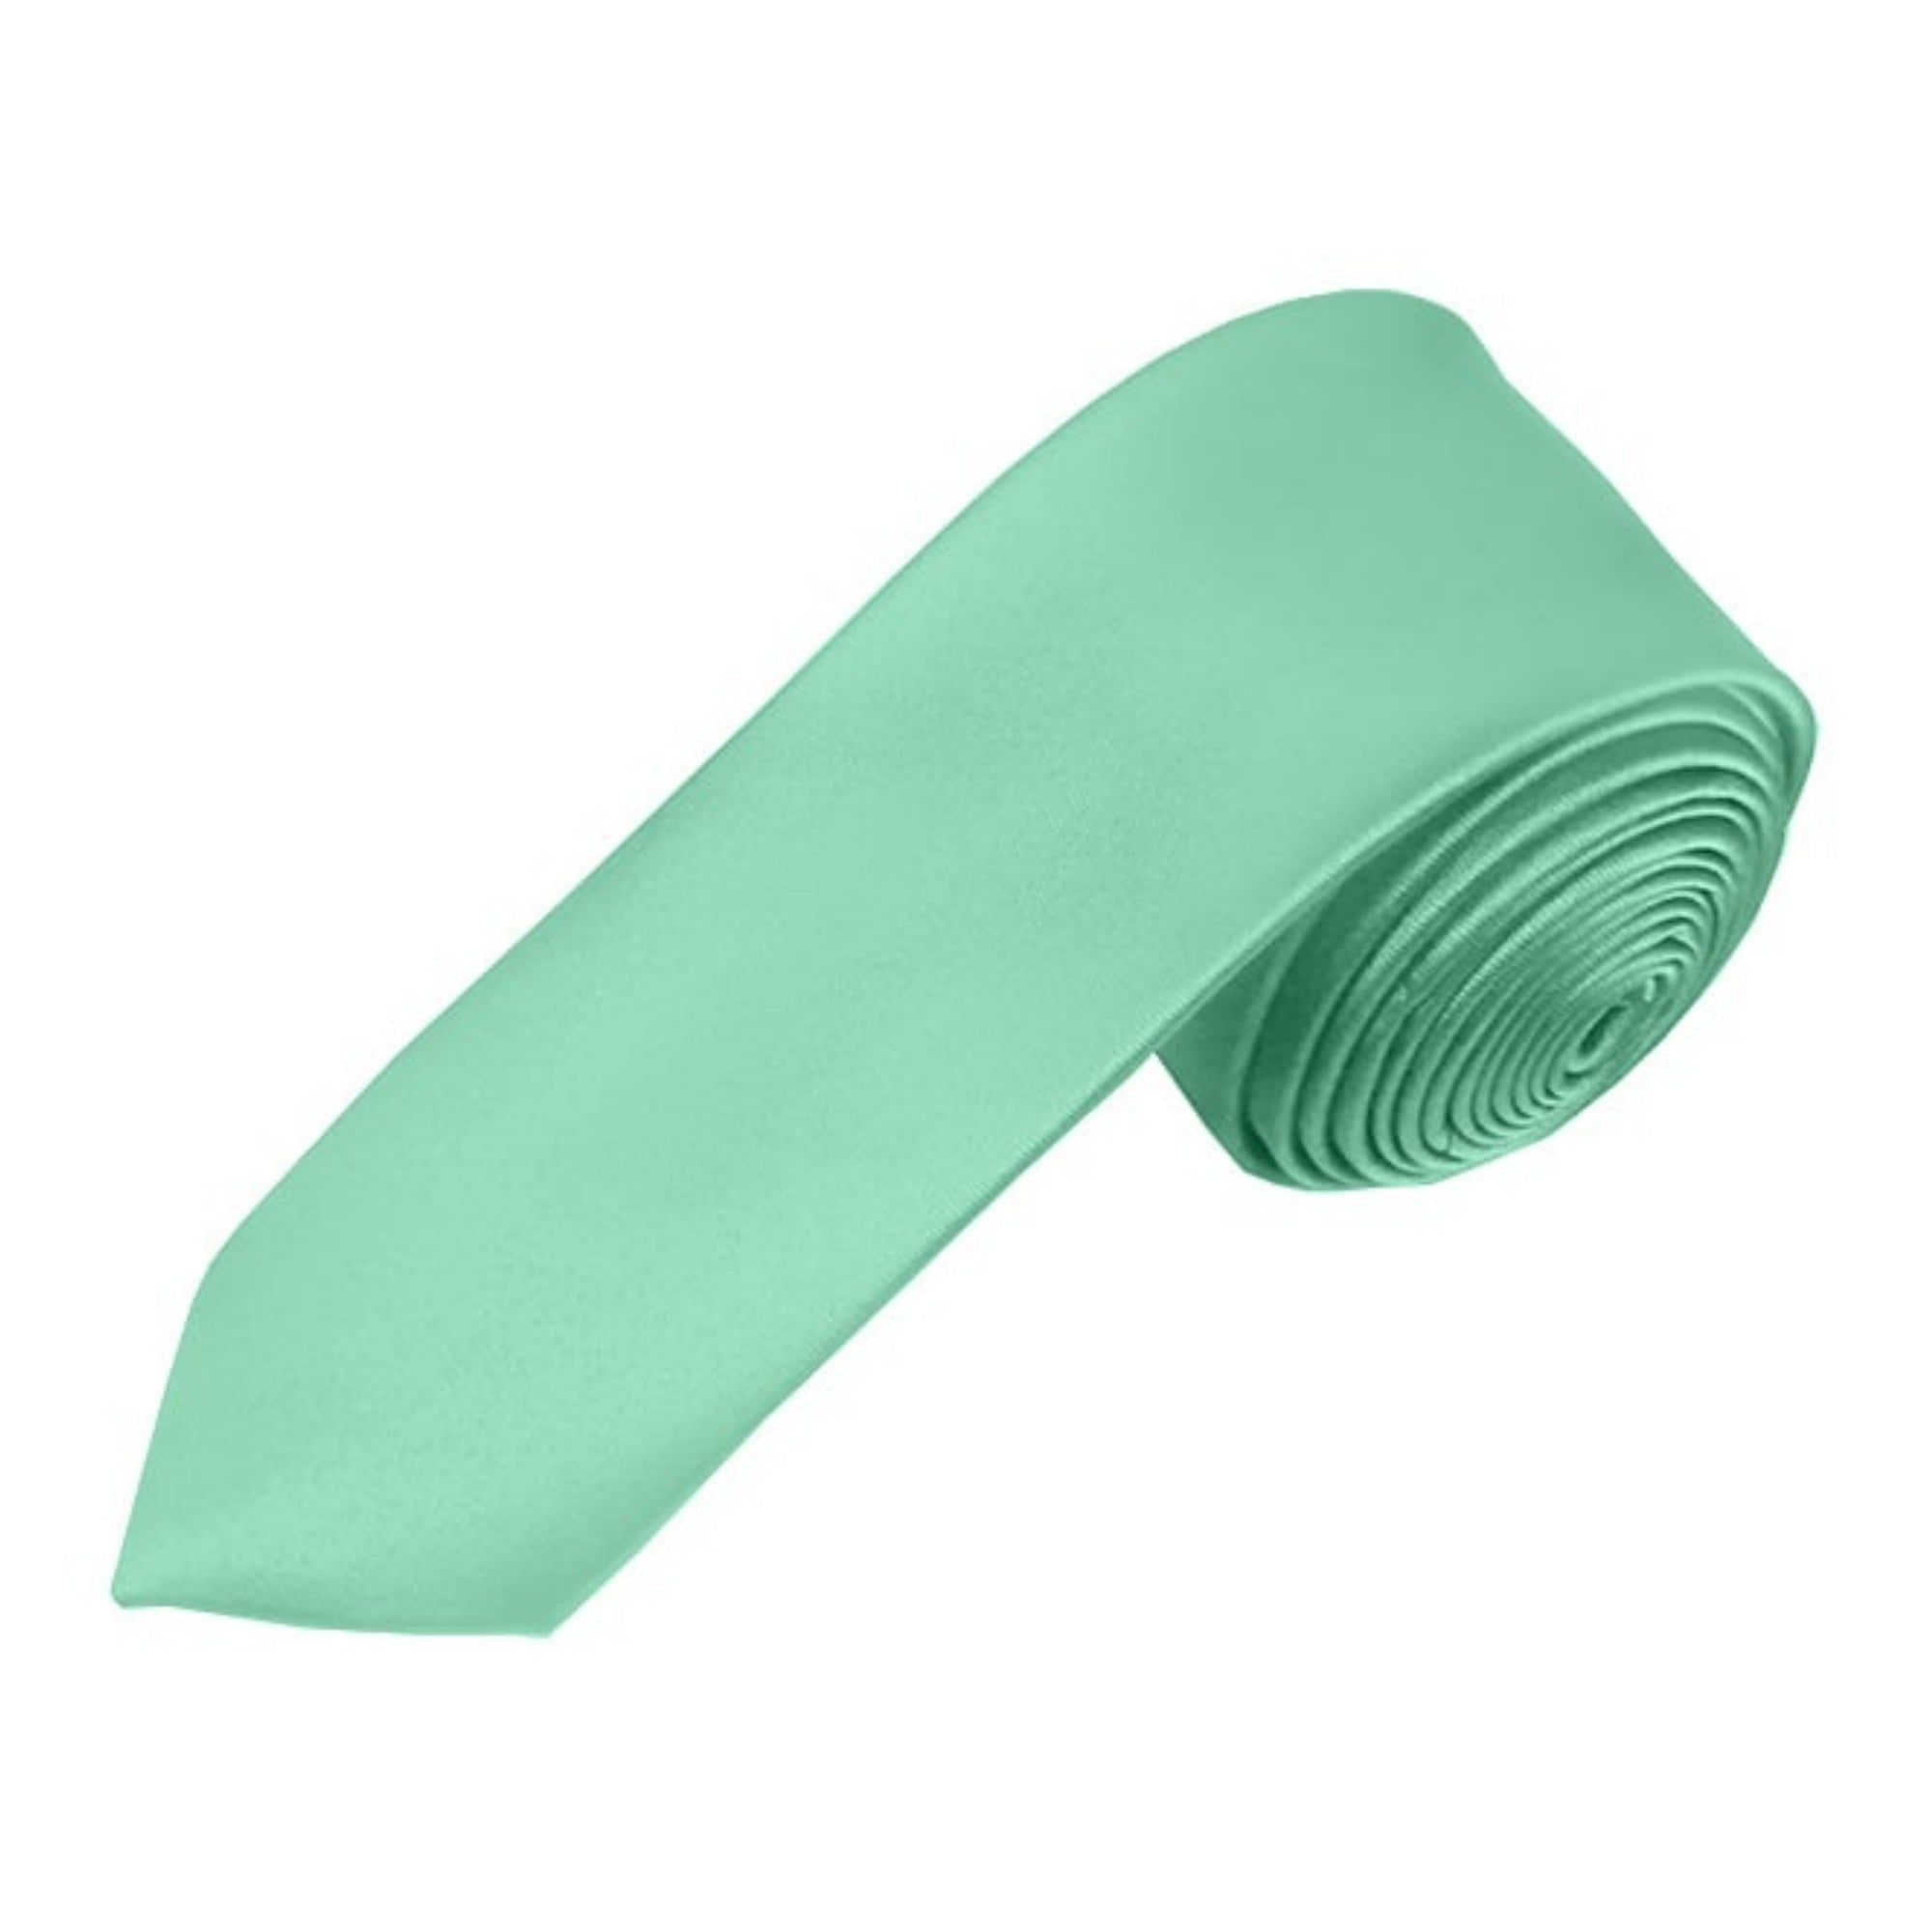 TheDapperTie Boy's Solid Color 2.75 Inch Wide And 48 Inch Long Neckties Neck Tie TheDapperTie Aqua Green  